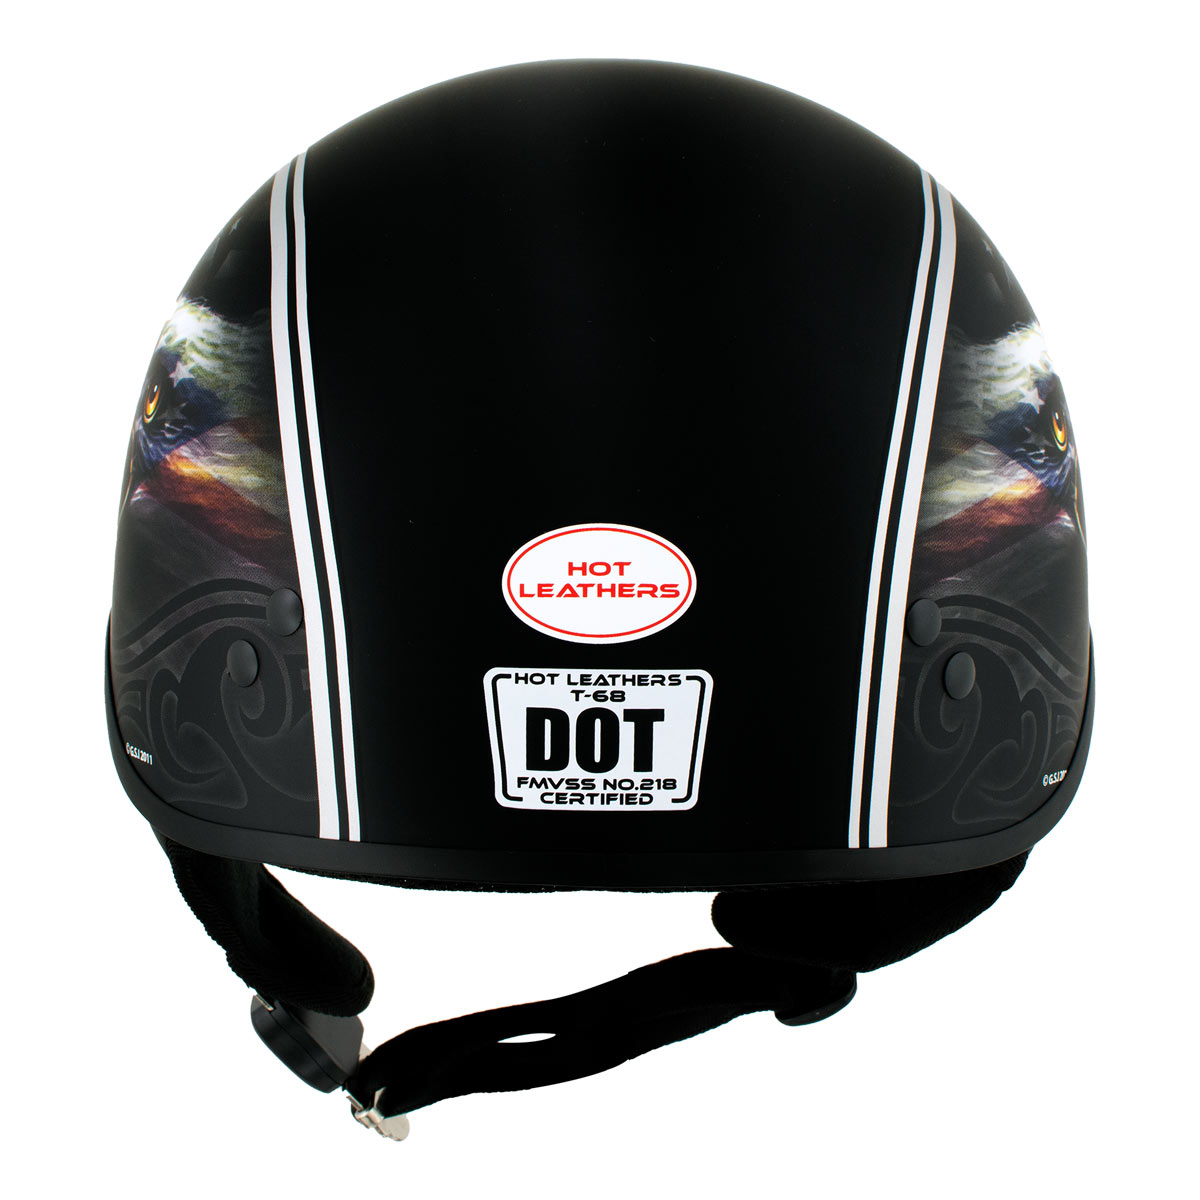 Hot Leathers HLD1050 'Glossy Silver' Motorcycle DOT Approved Skull